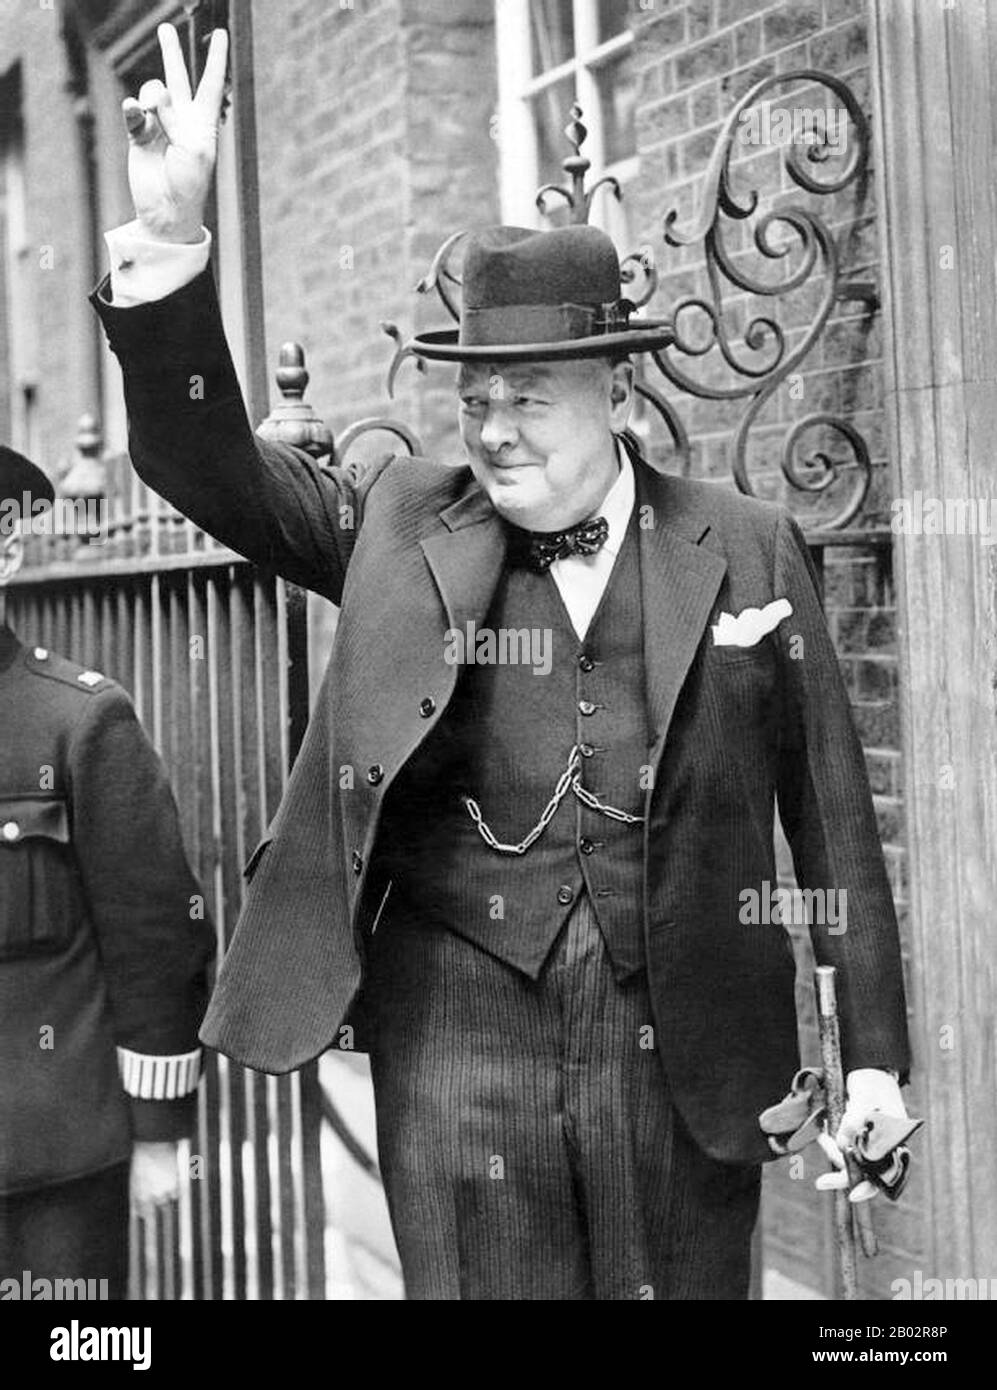 Sir Winston Leonard Spencer-Churchill, KG, OM, CH, TD, DL, FRS, RA (30 November 1874 – 24 January 1965) was a British politician who was the Prime Minister of the United Kingdom from 1940 to 1945 and again from 1951 to 1955.  Widely regarded as one of the greatest wartime leaders of the 20th century, Churchill was also an officer in the British Army, a historian, a writer (as Winston S. Churchill), and an artist. He won the Nobel Prize in Literature, and was the first person to be made an honorary citizen of the United States. Stock Photo